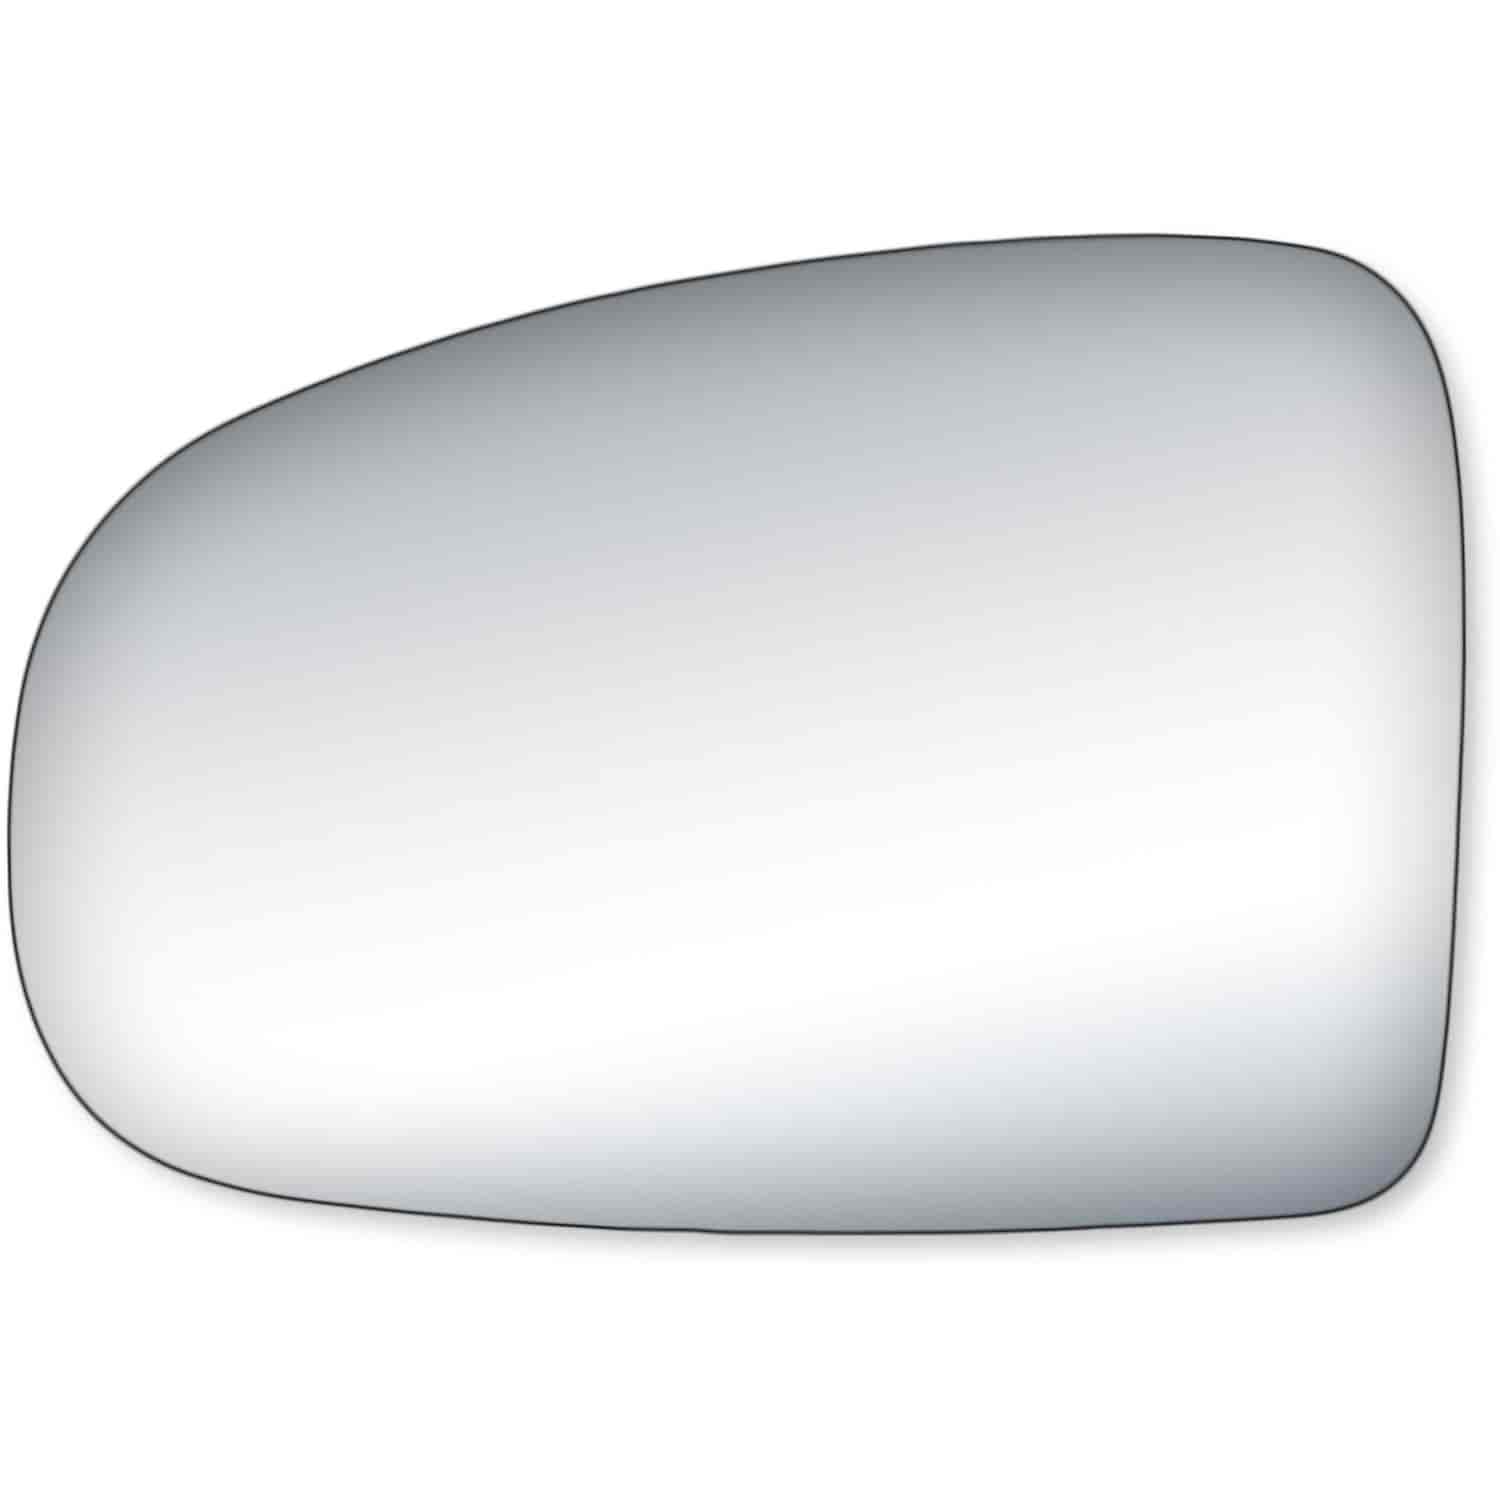 Replacement Glass for 10-13 Prius G L S Sedan the glass measures 4 1/2 tall by 6 3/4 wide and 7 1/4